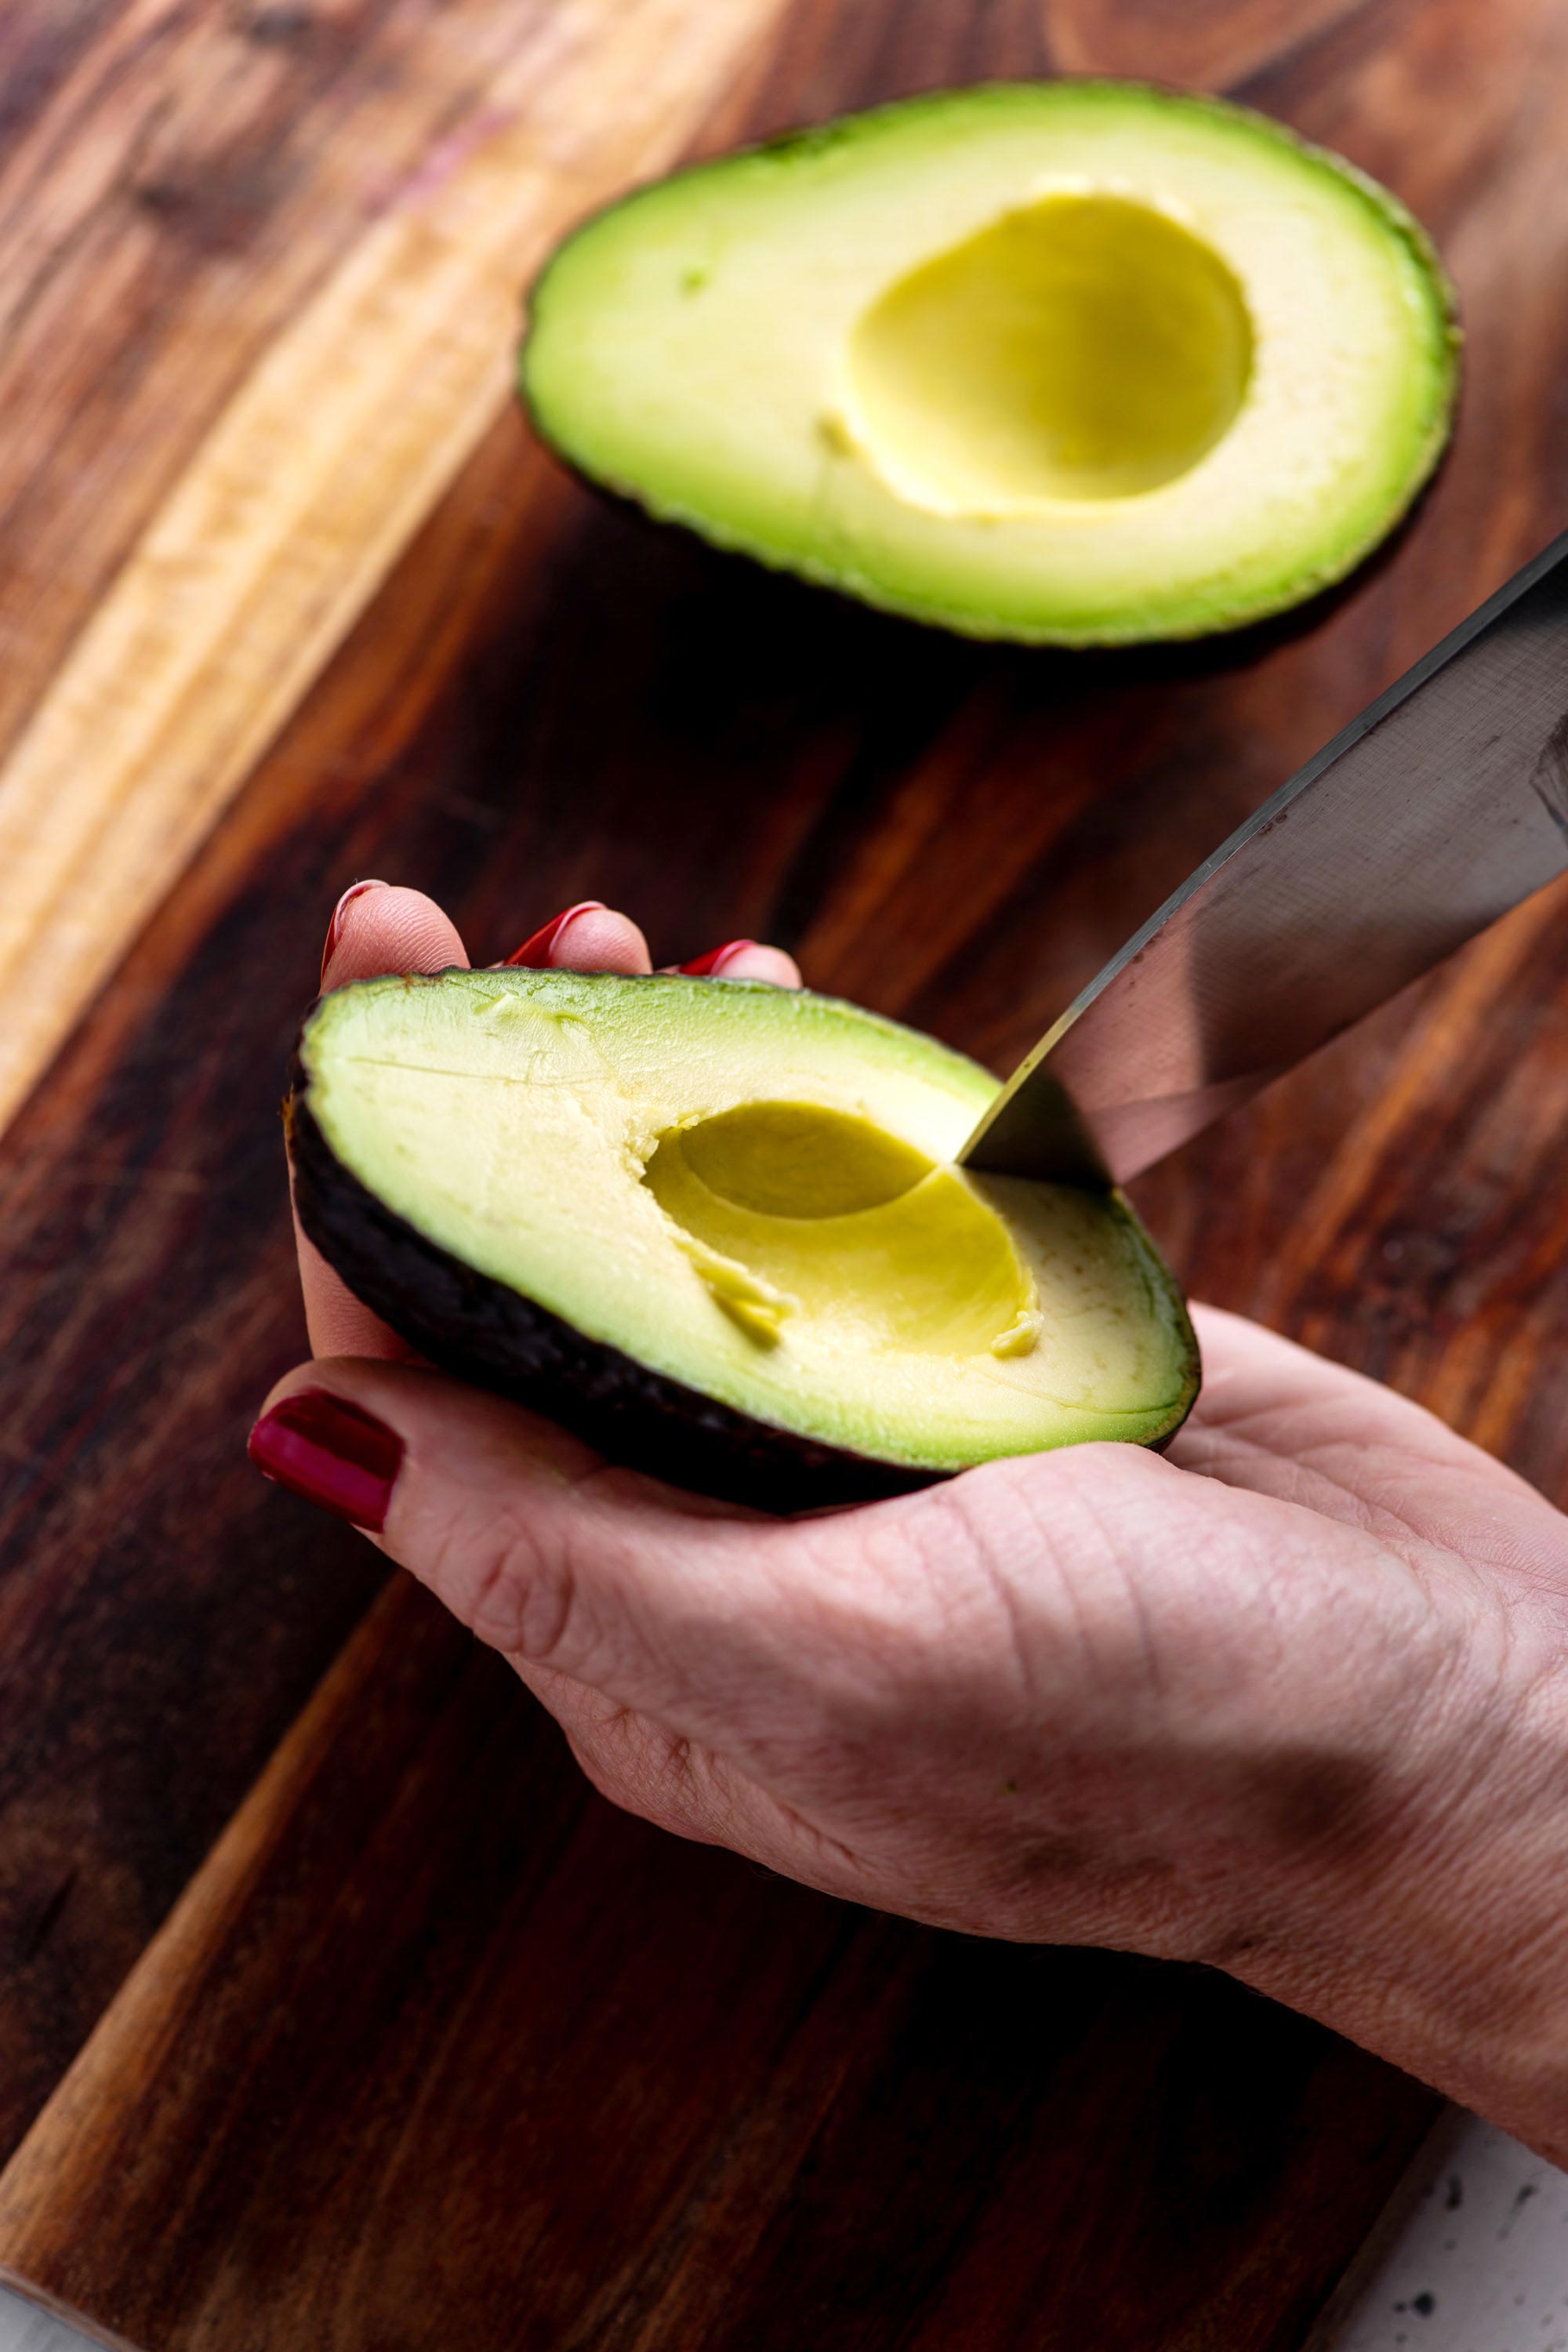 Woman cutting avocado in the shell with a knife.